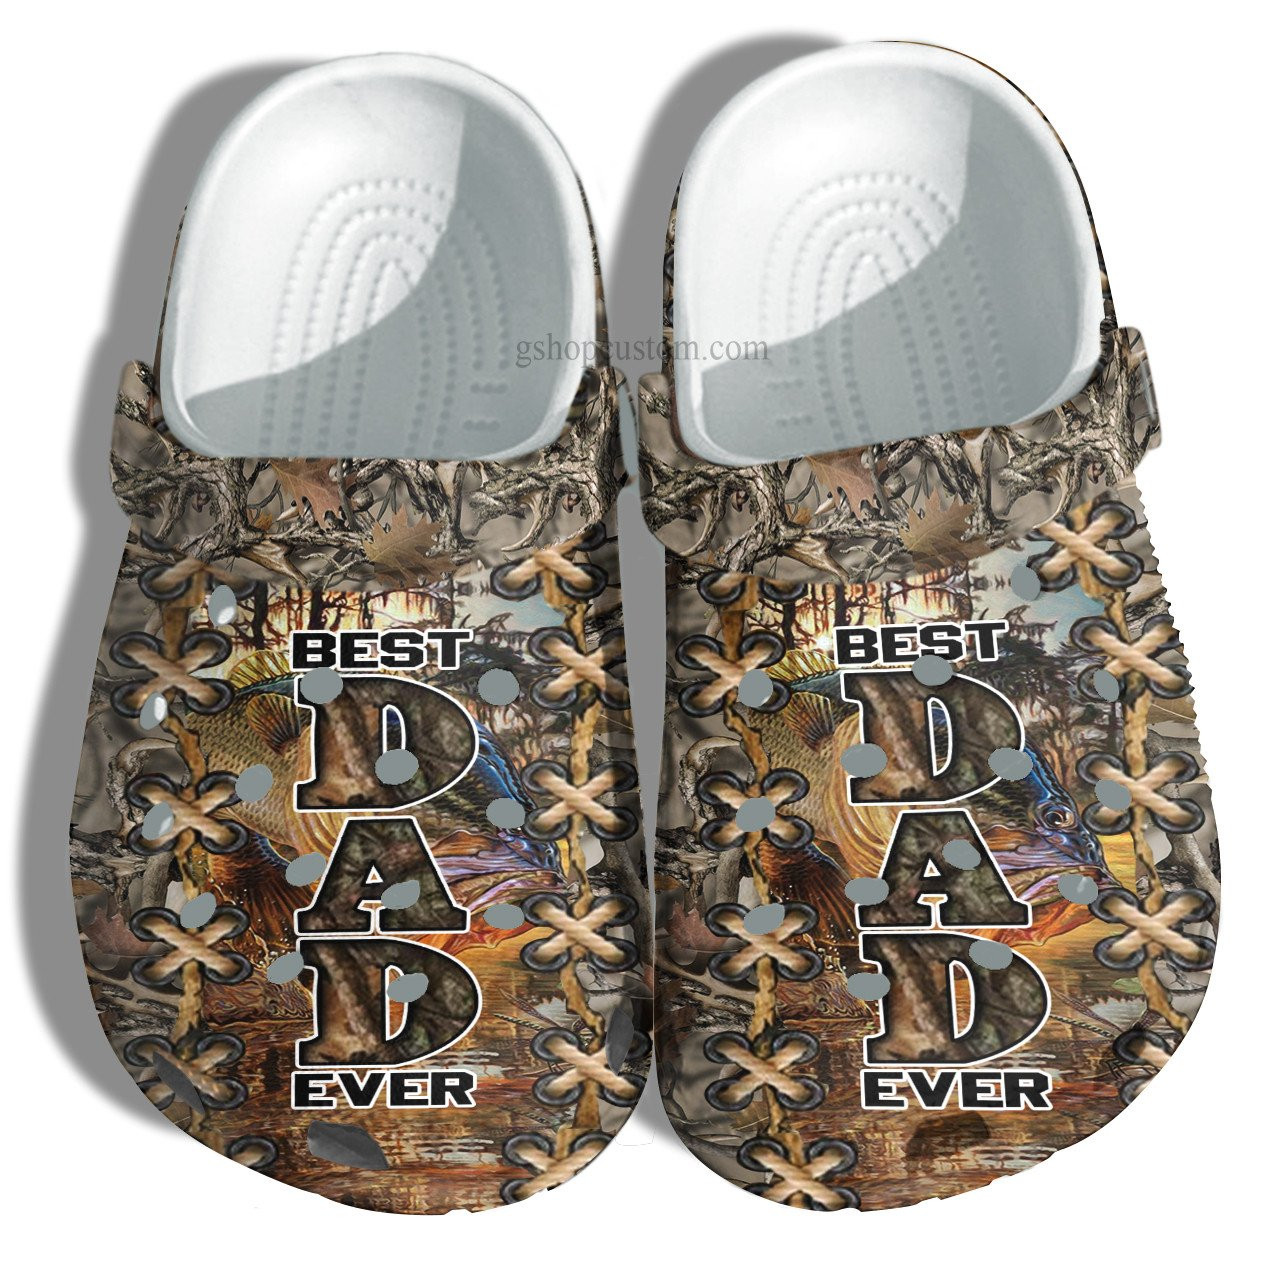 Best Dad Ever Fishing Camouflage Croc Shoes Gift Men Father Day- Fishing Camo Army Crocs Shoes For Son